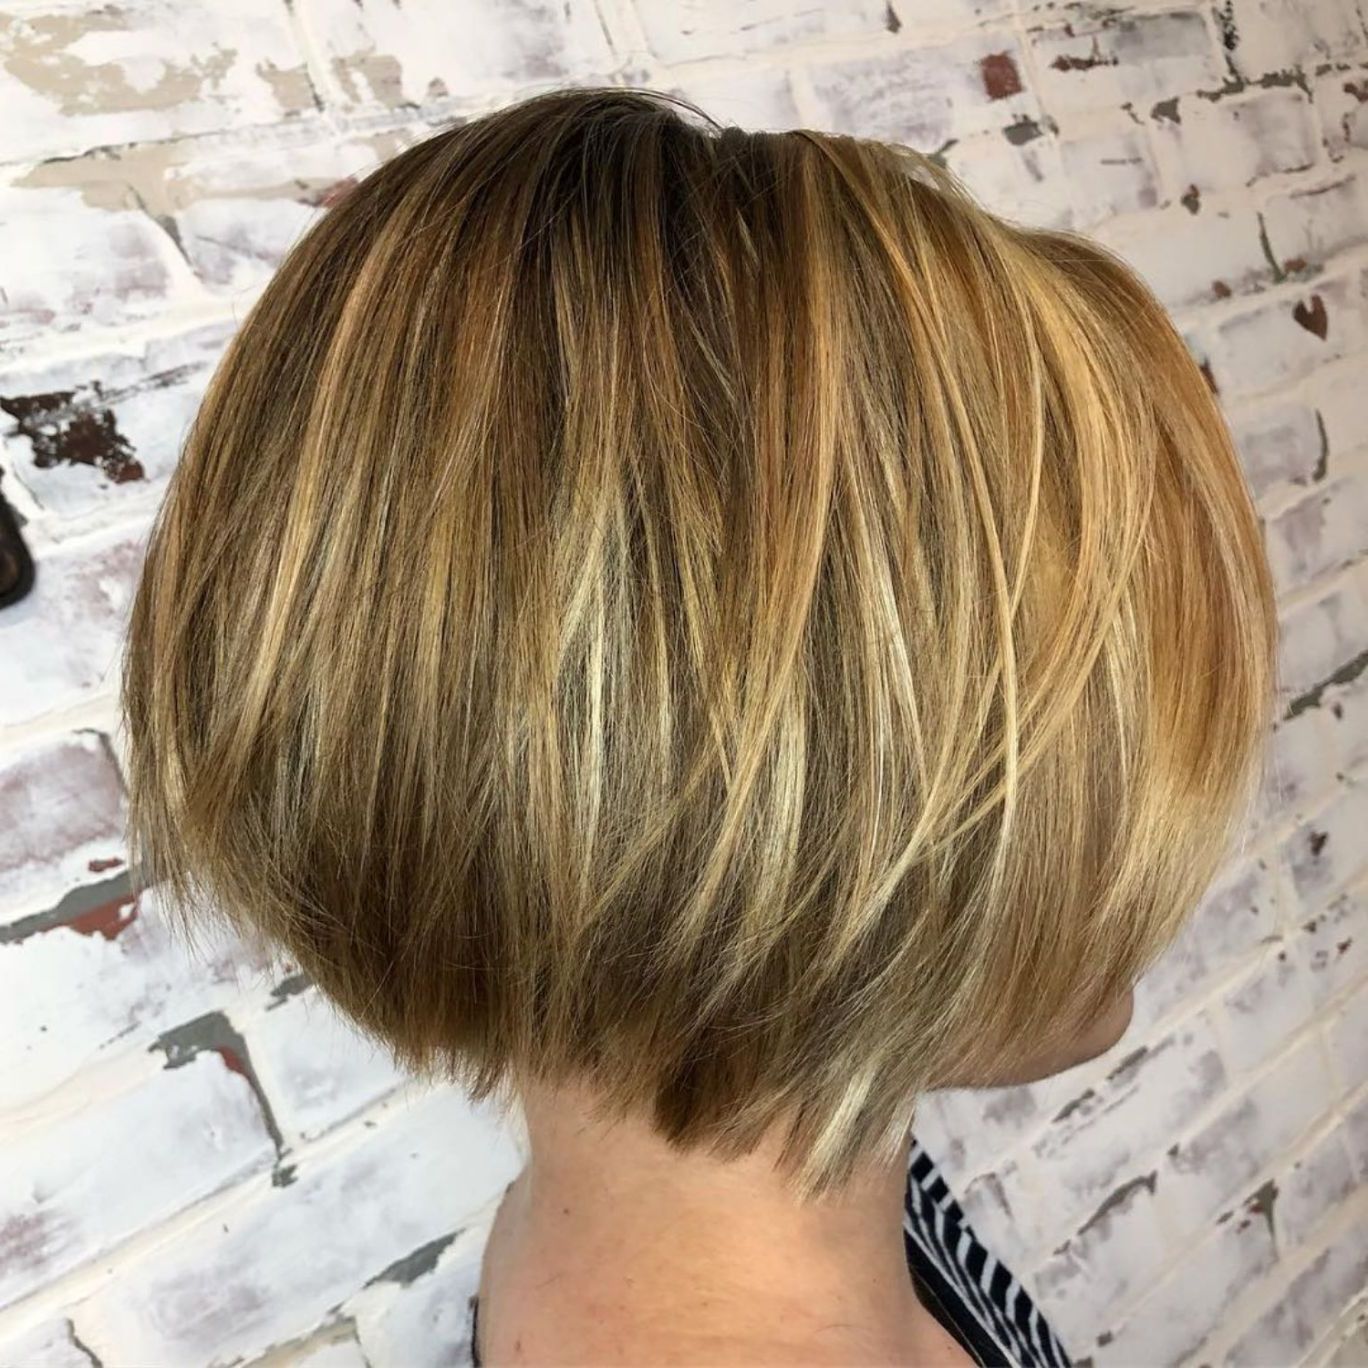 Pin On Hair & Makeup With Regard To Most Recently Released Golden Bronde Sliced Bob Hairstyles (View 4 of 20)